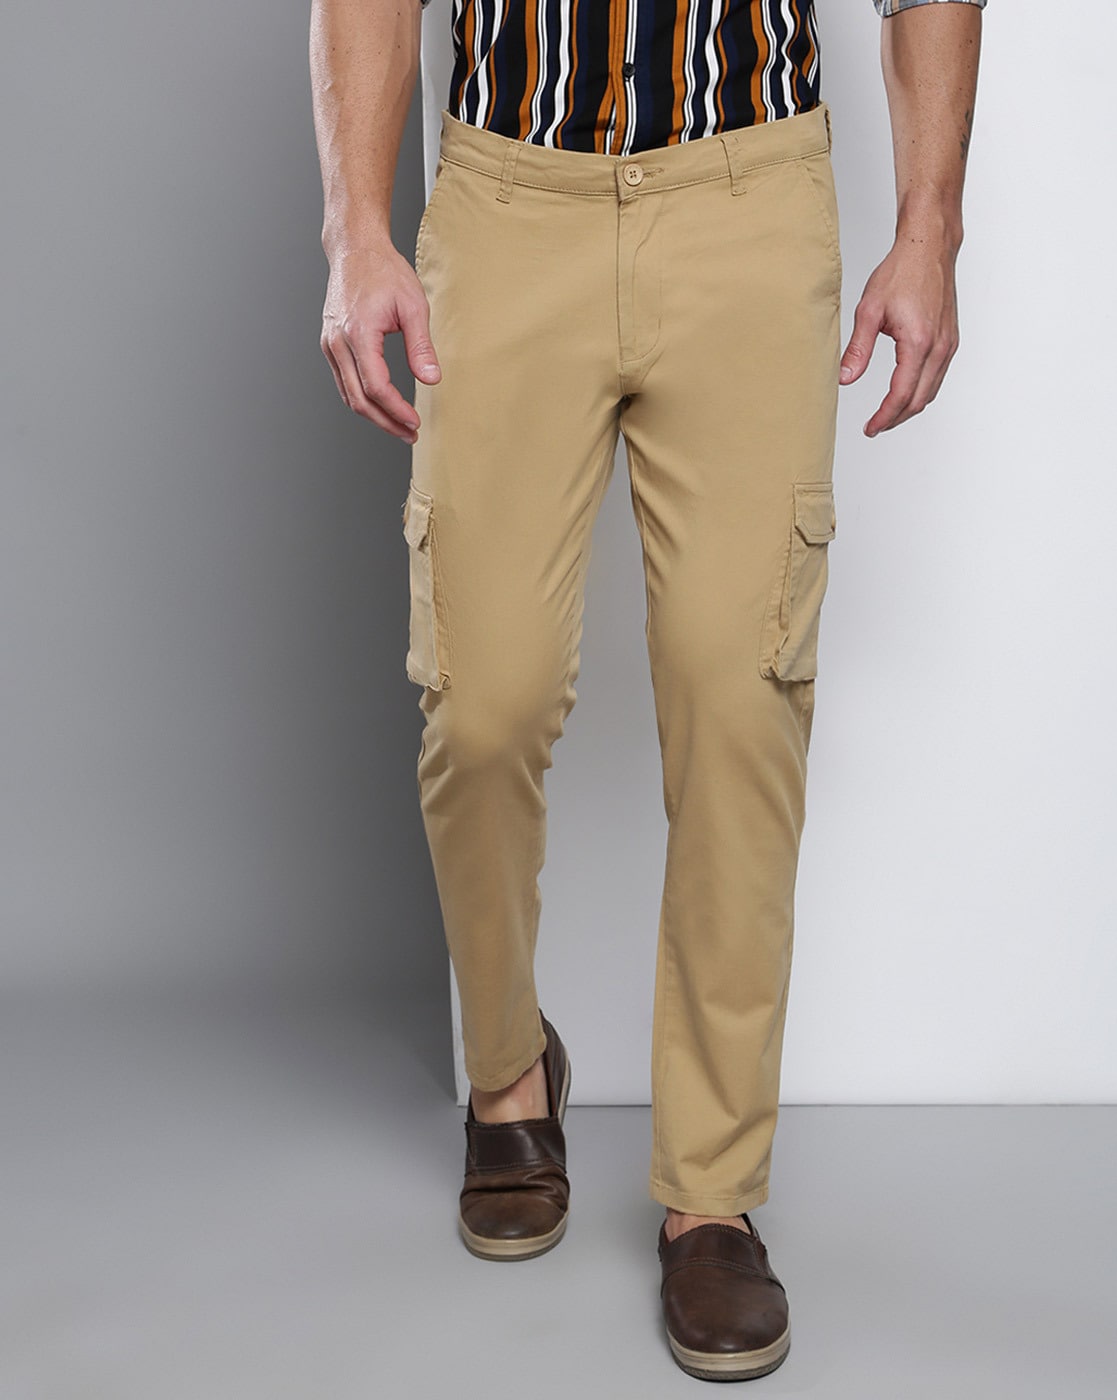 In-thing Khaki Slim Fit Casuals Flat Trousers - Buy In-thing Khaki Slim Fit  Casuals Flat Trousers Online at Best Prices in India on Snapdeal